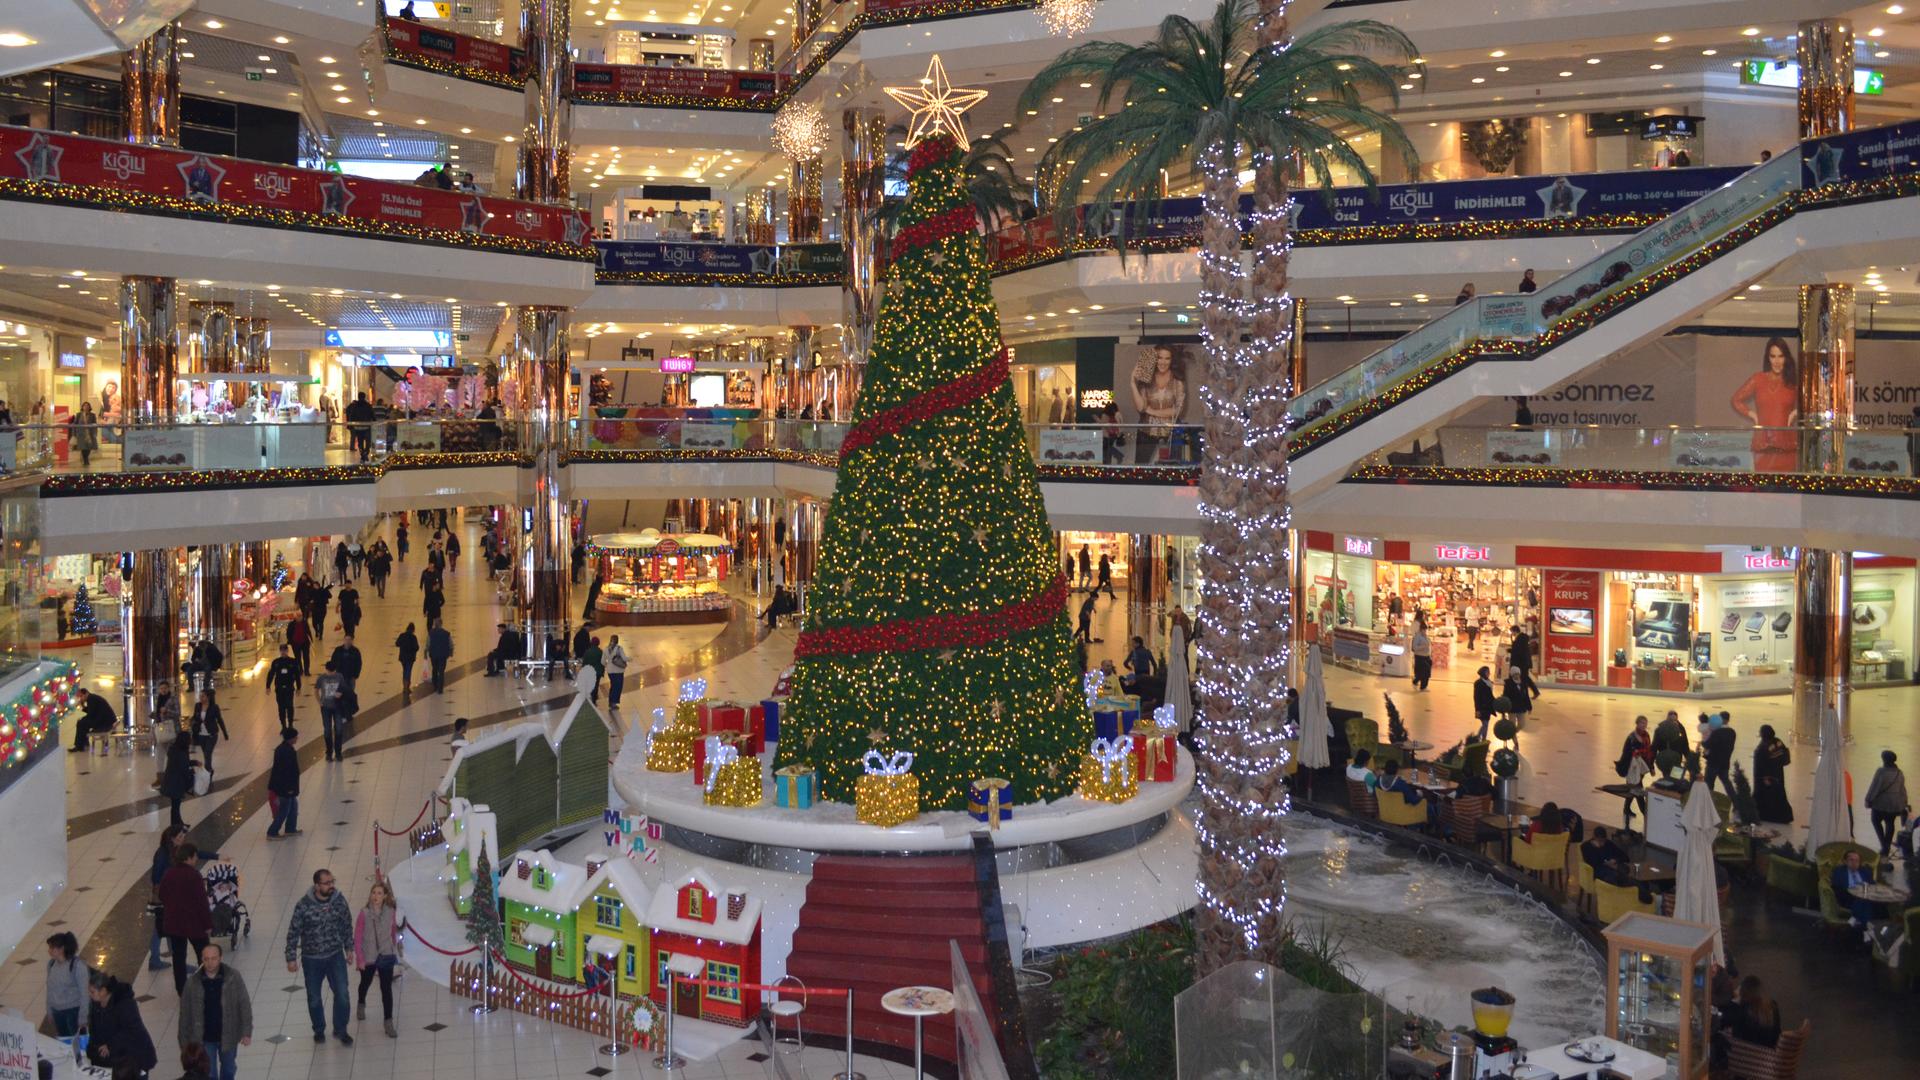 A massive evergreen tree towers over the atrium in one of Istanbul’s largest malls.